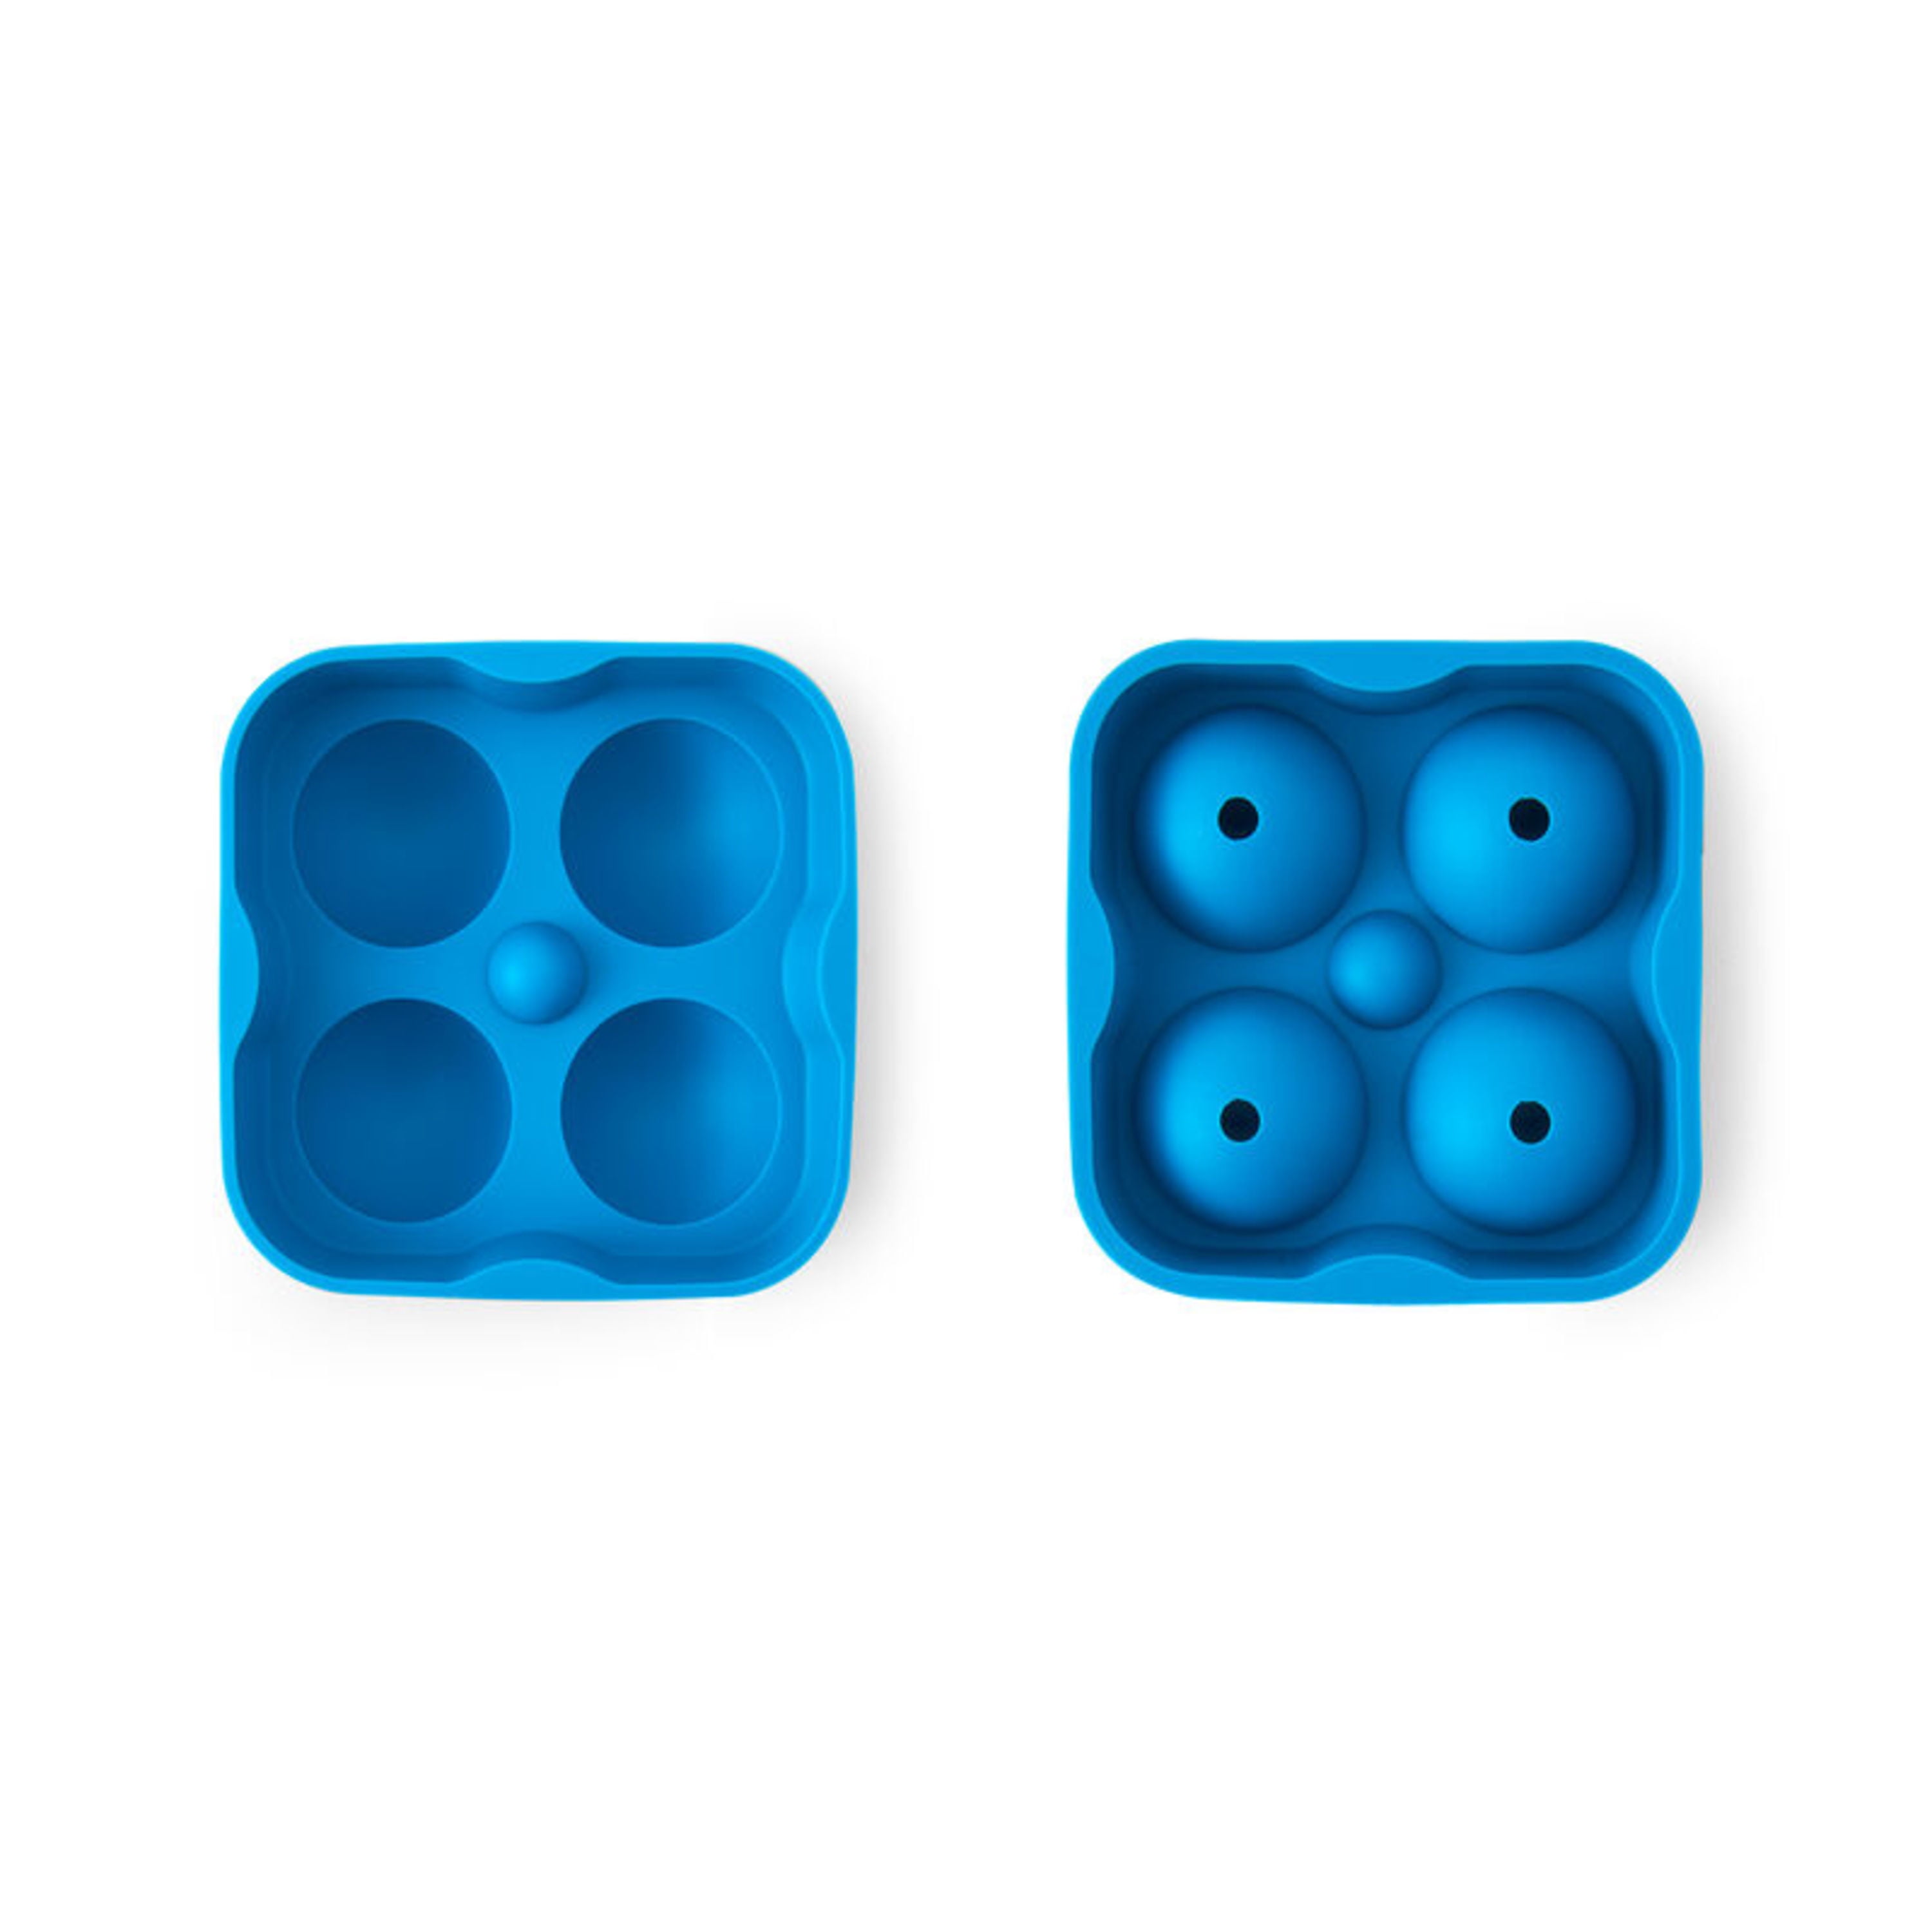 Houdini Large 4 Spheres Silicone Ice Sphere Mold Creates in Blue